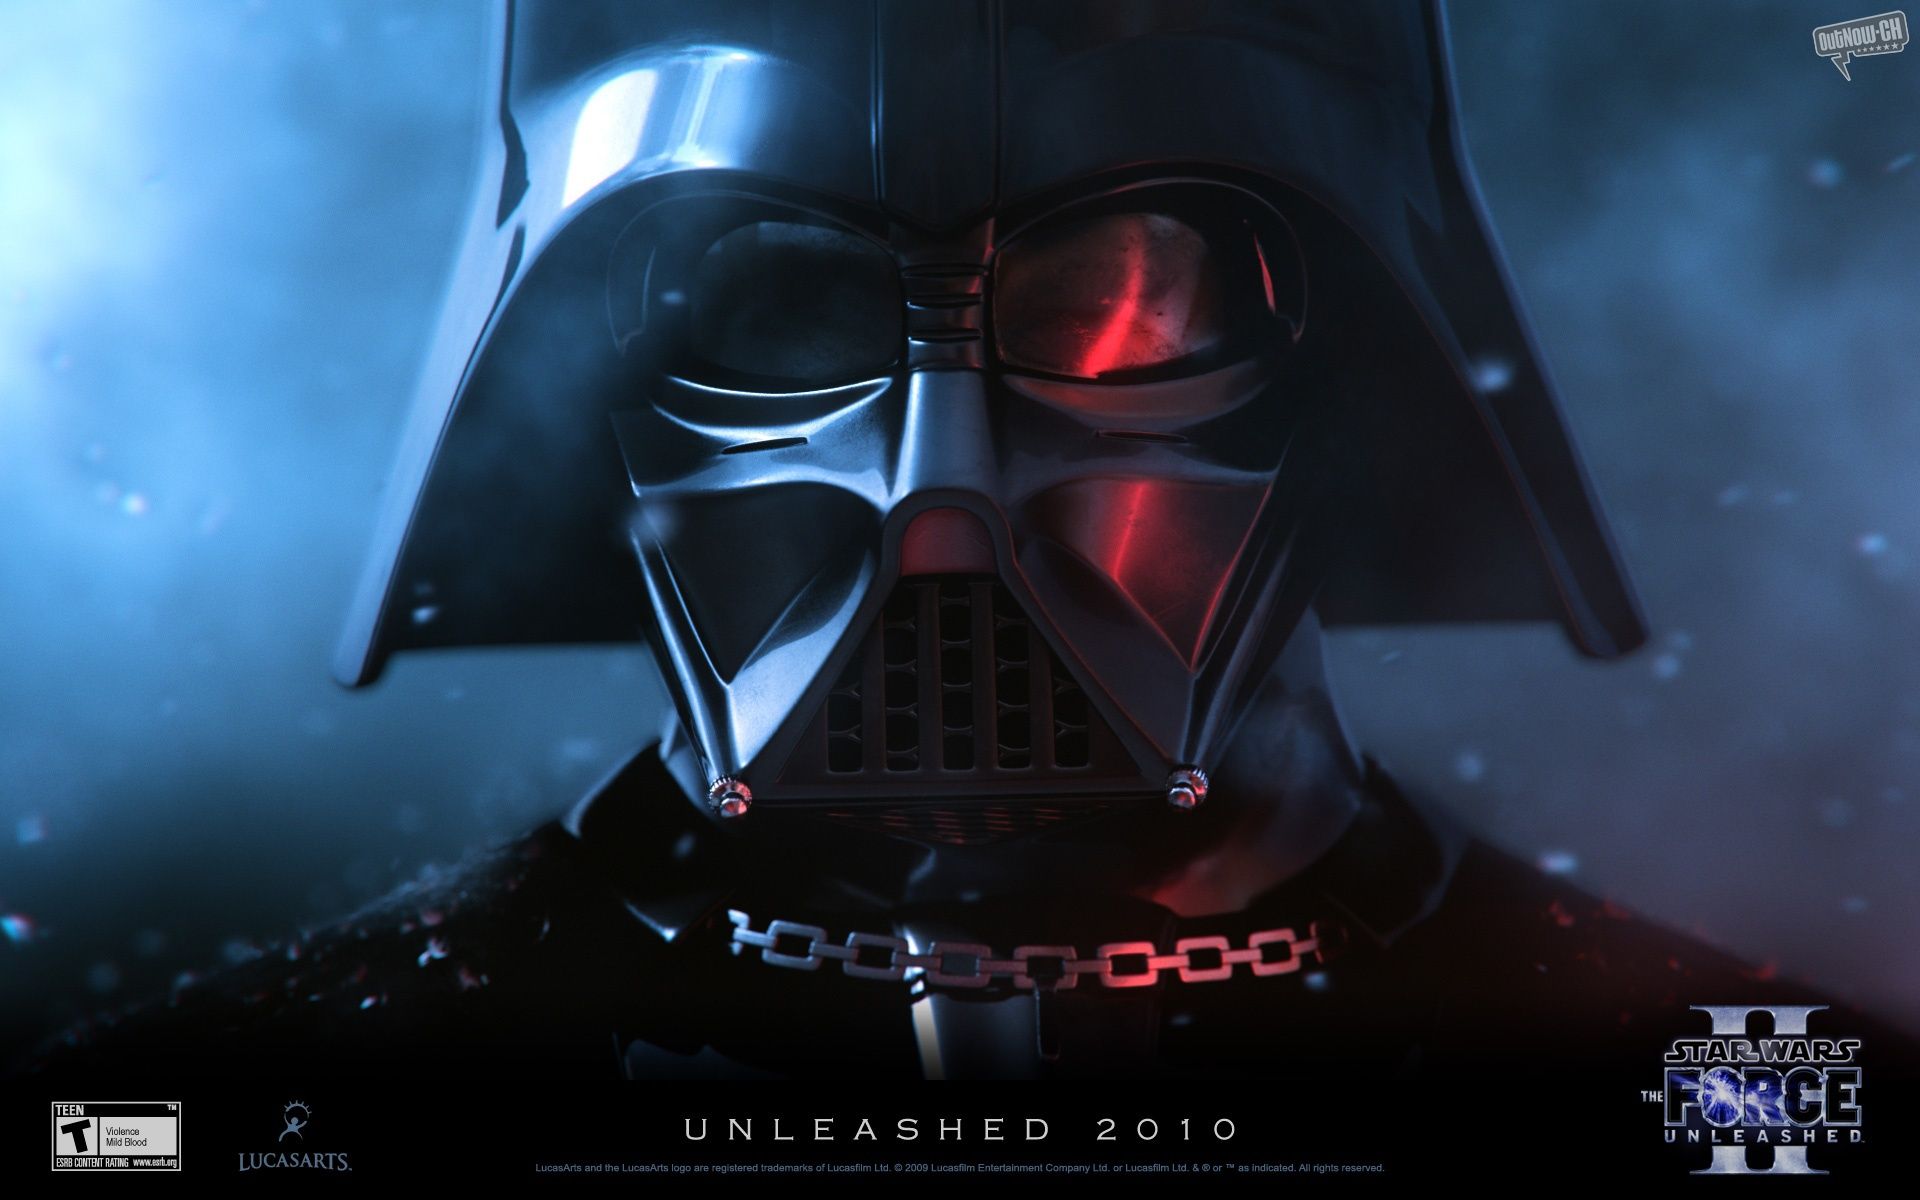 Star Wars: Force Unleashed 2 wallpapers | Star Wars: Force ...